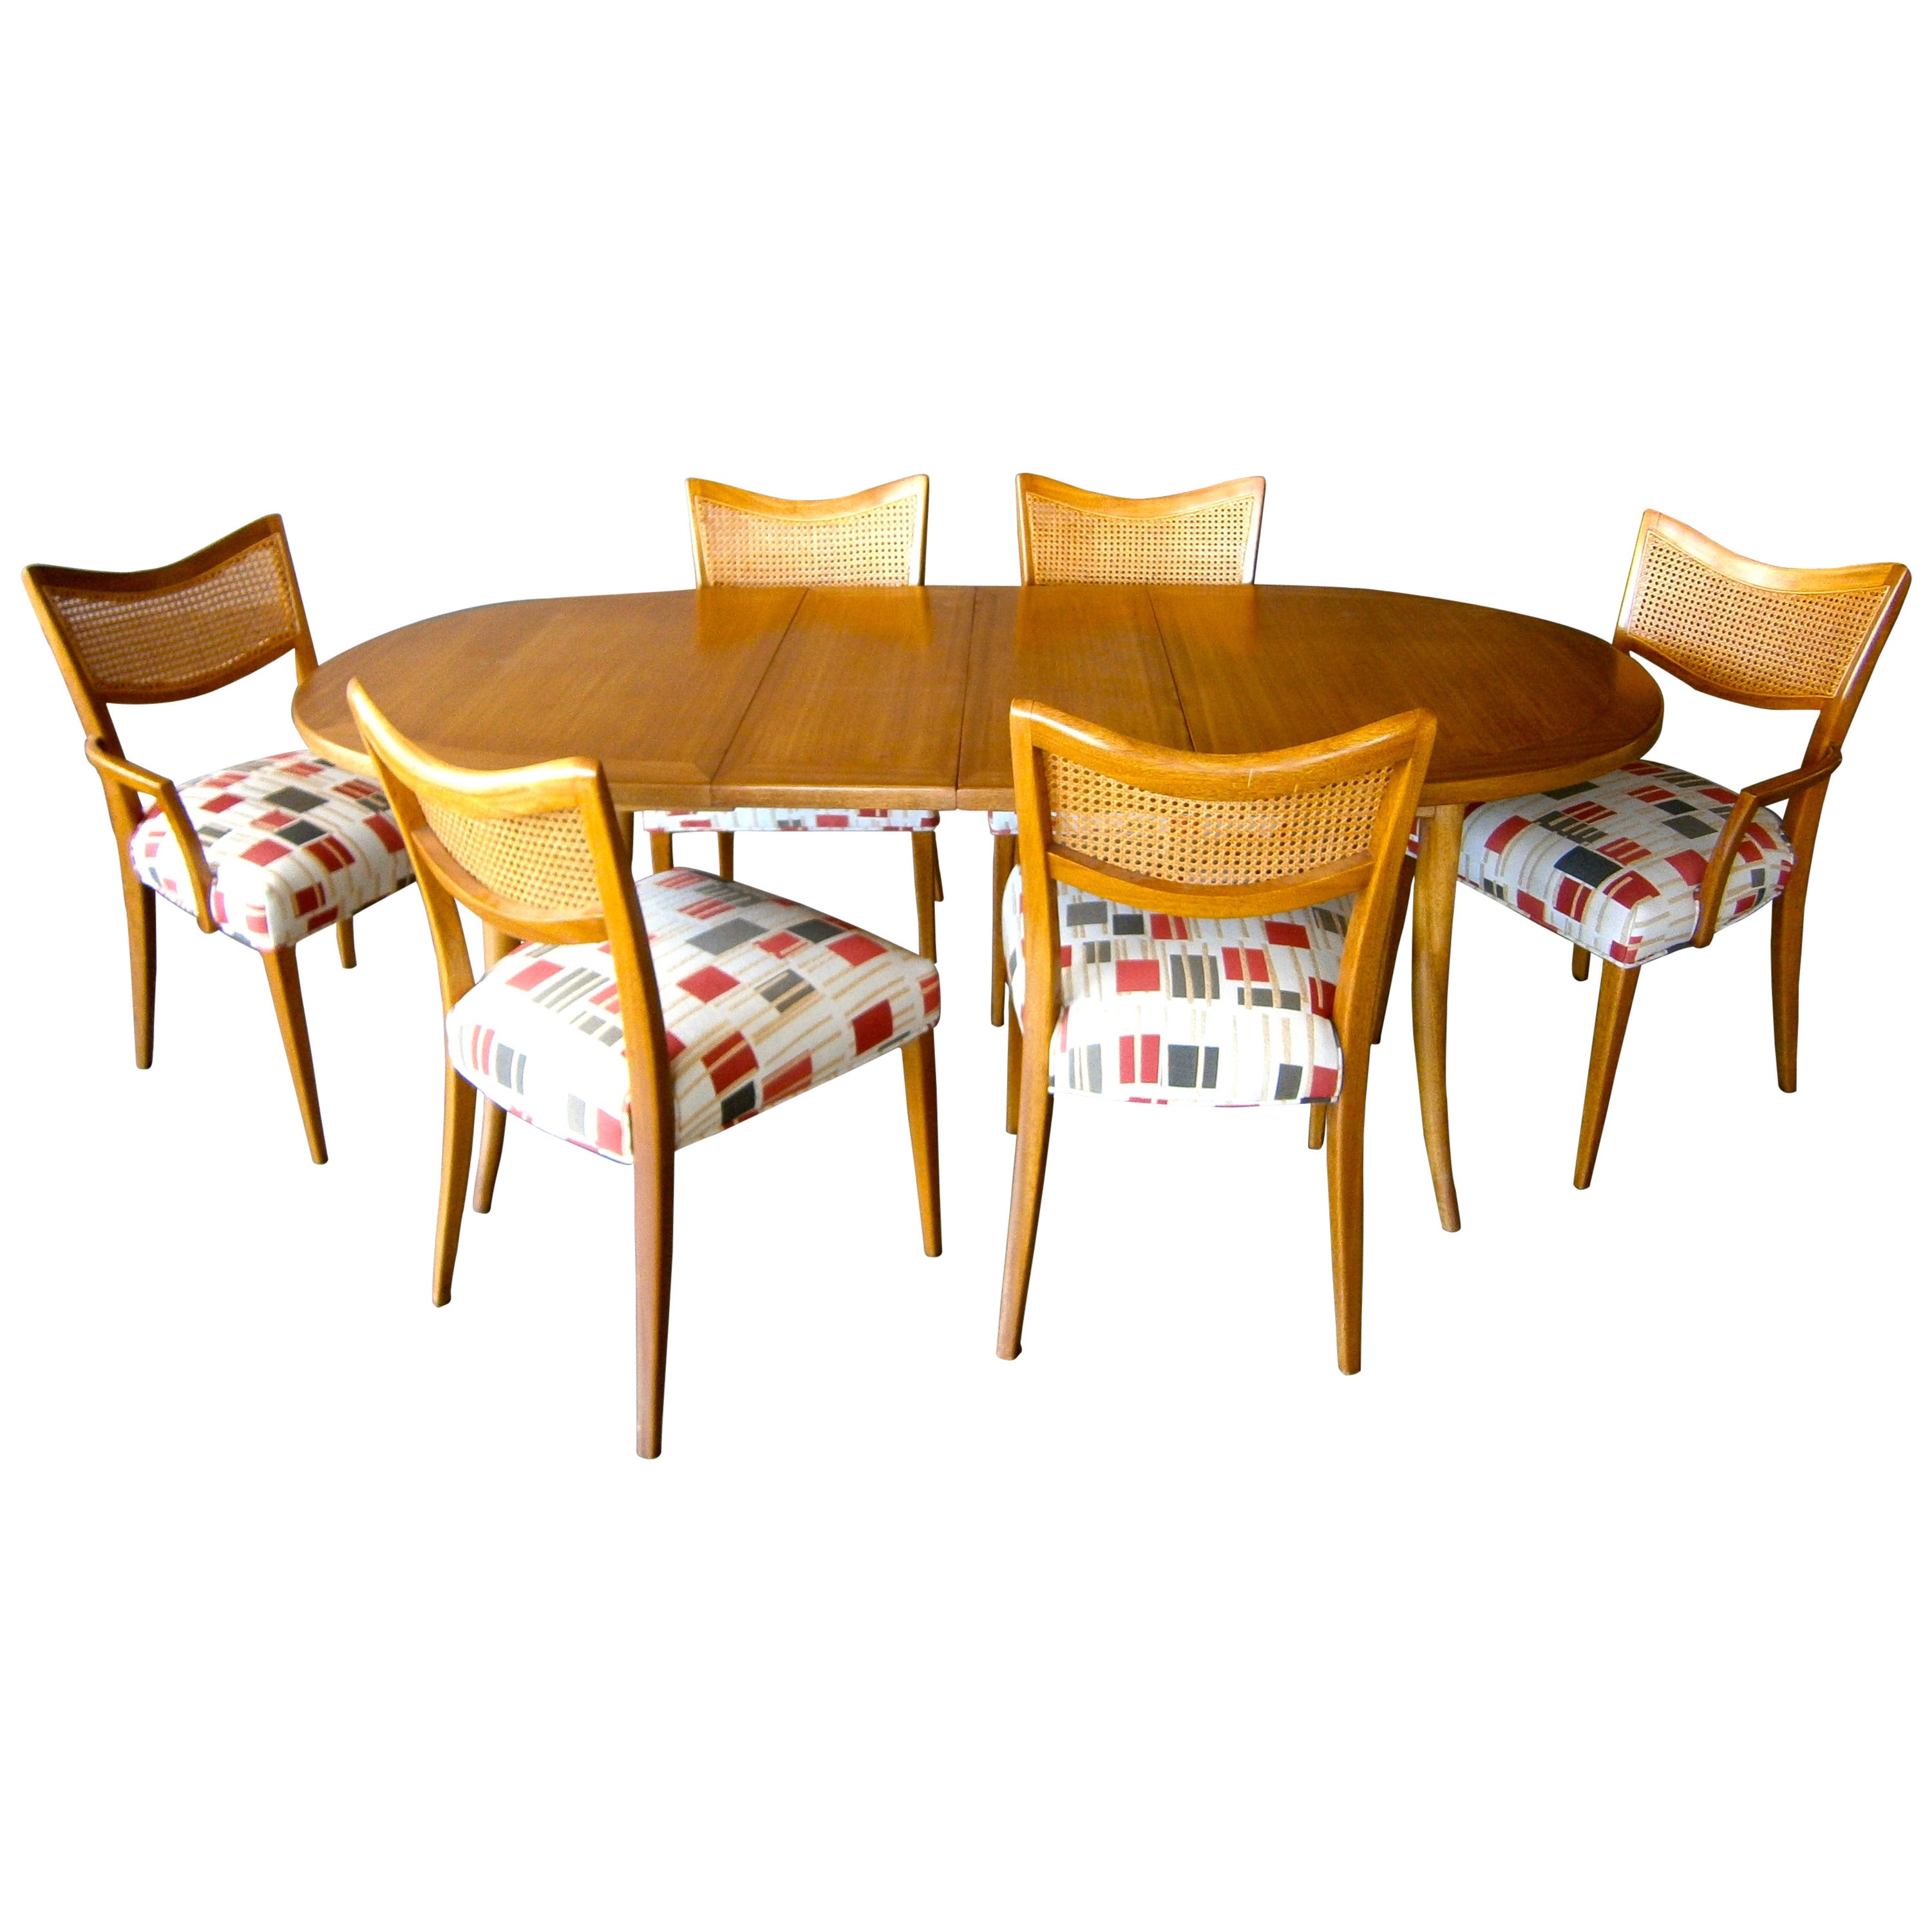 Bleached Mahogany Dining Room Set Designed by Harvey Probber, C.1950s